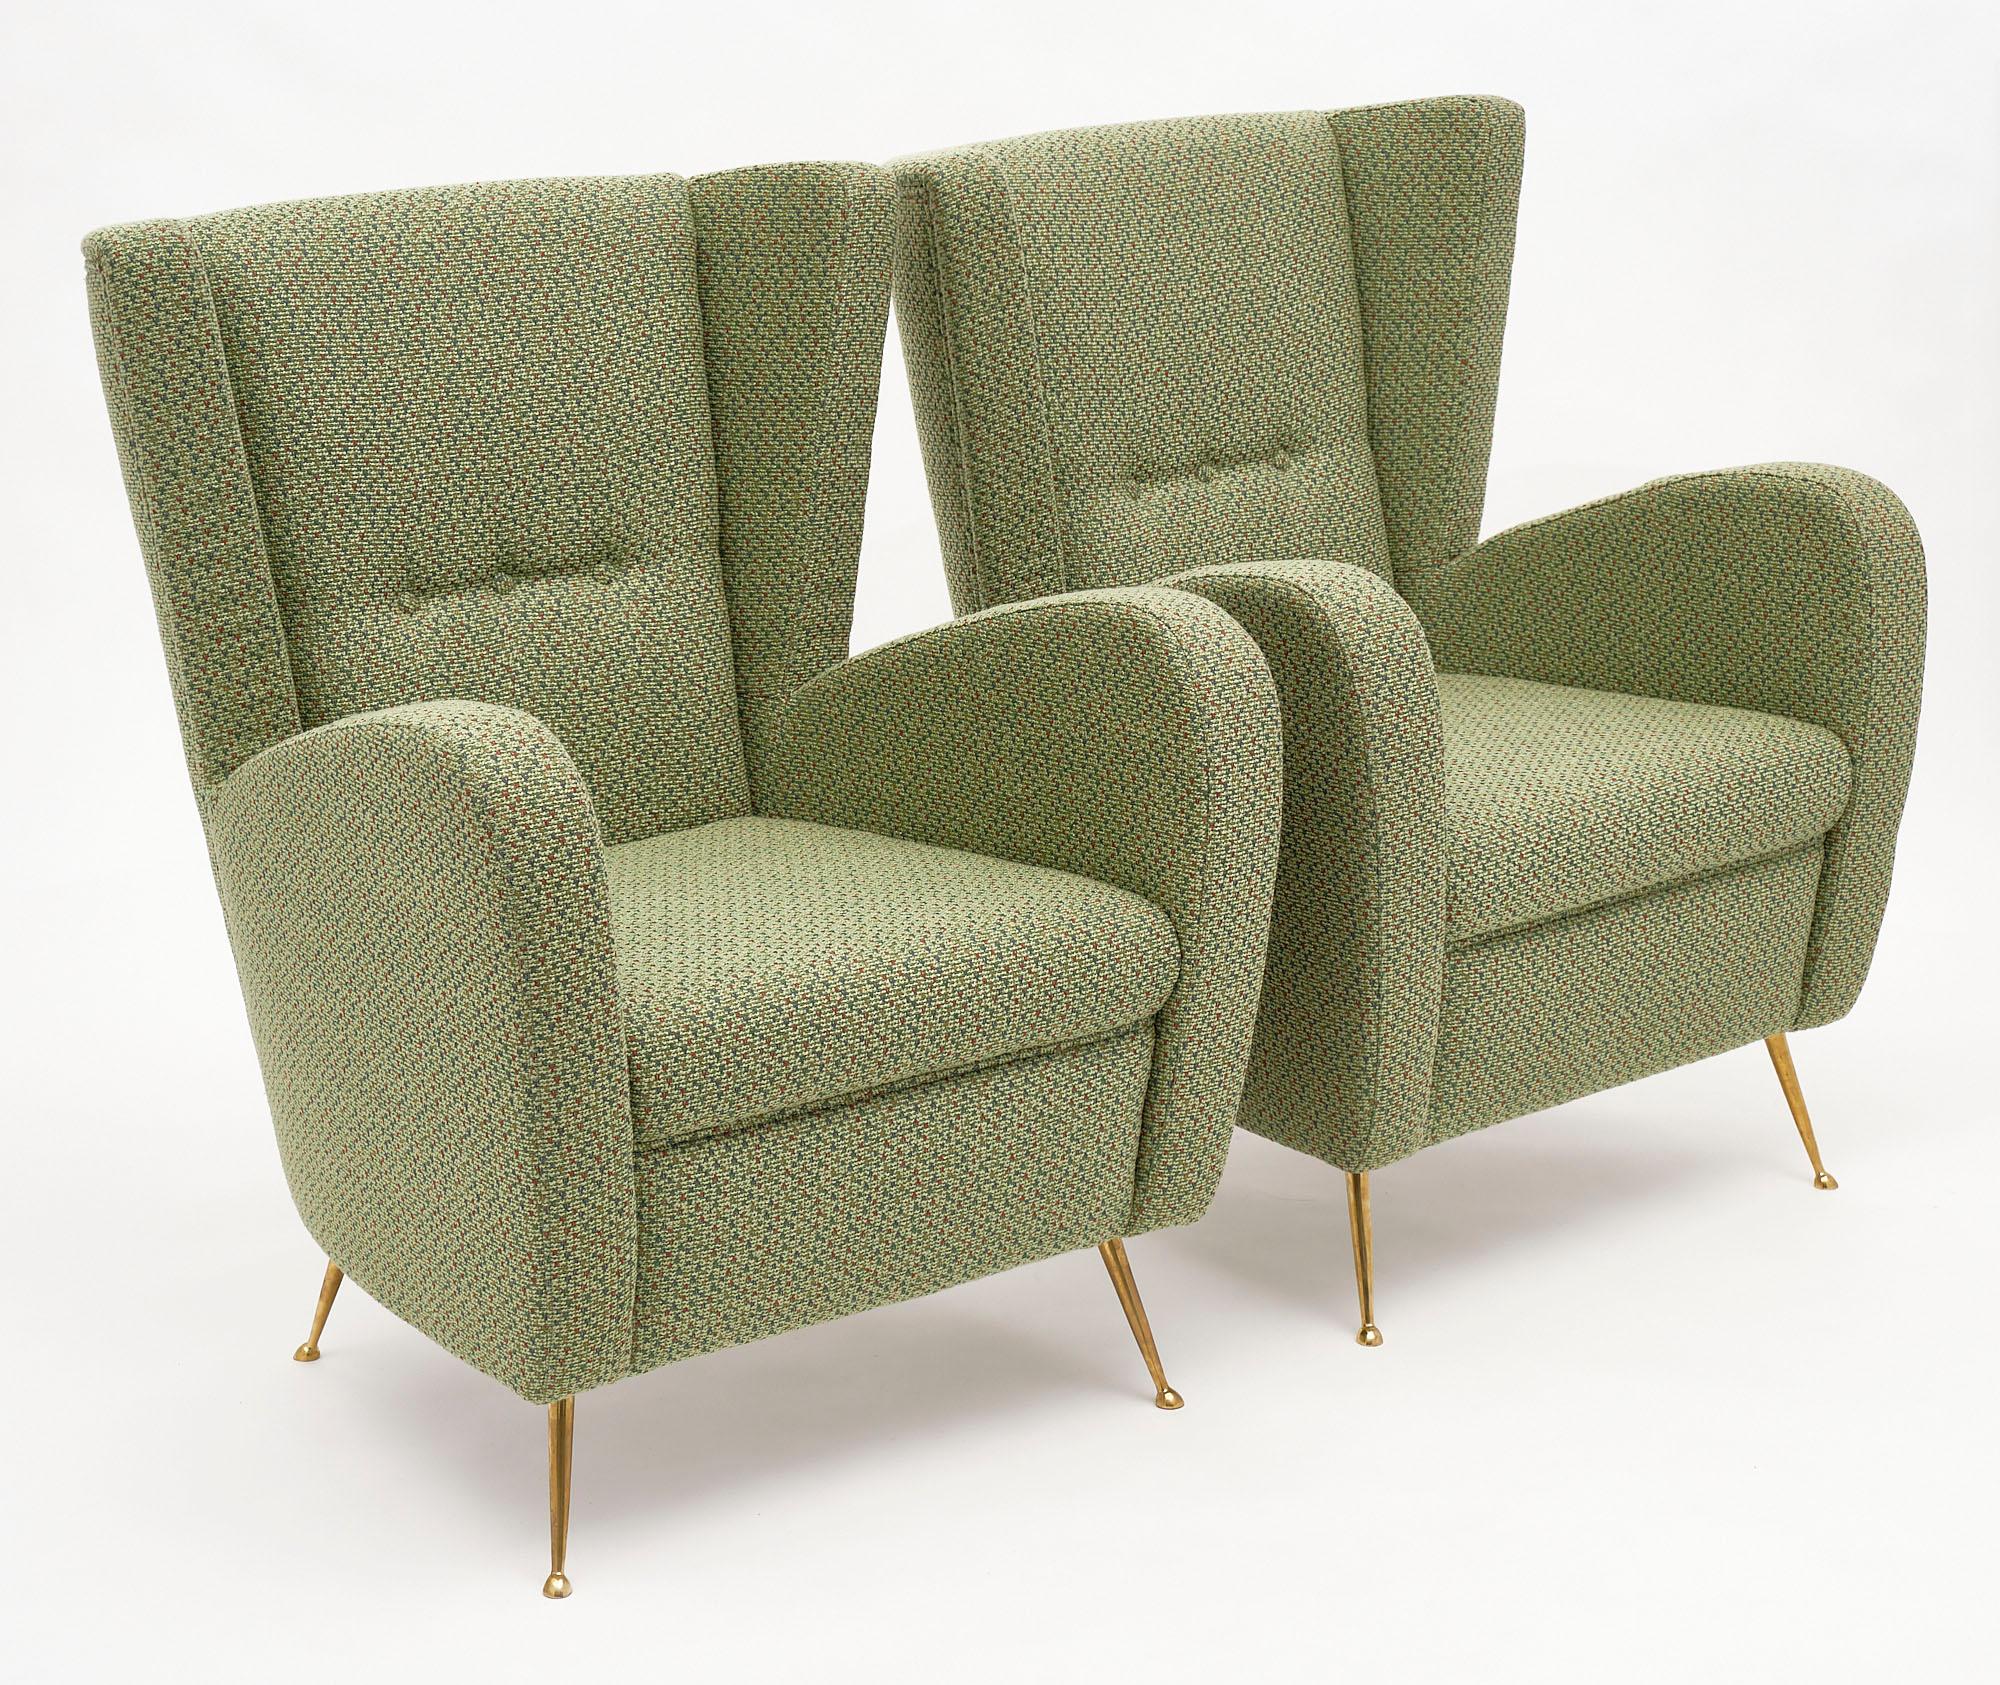 Pair of vintage green Italian armchairs by Poltrona Frau. The newly upholstered pair have a green wool blend and are supported by gilt polished brass legs. They are quite comfortable and sturdy.